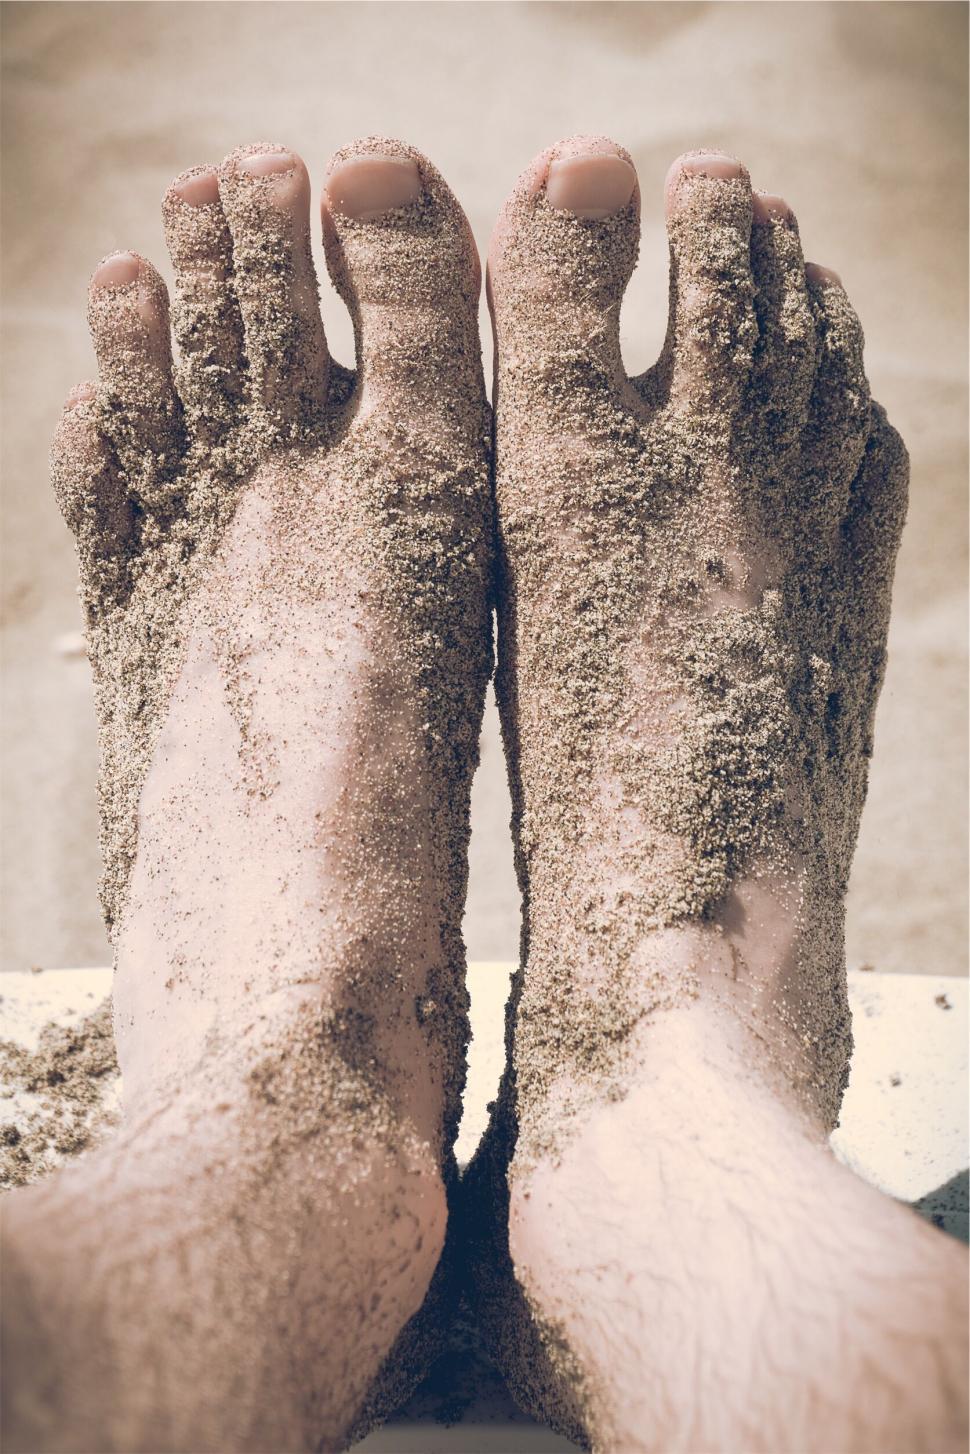 Free Image of Sandy beach vacation feet buried in sand 